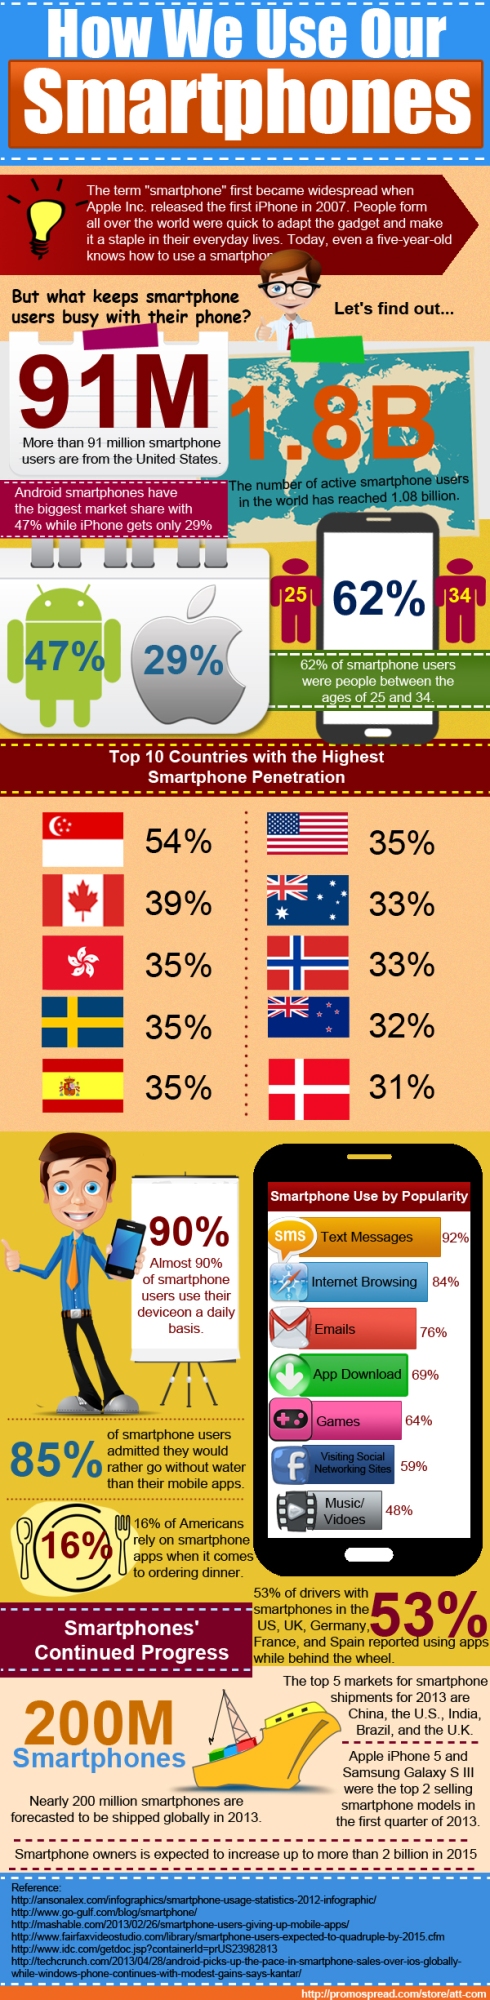 Smartphones - How We Use Them